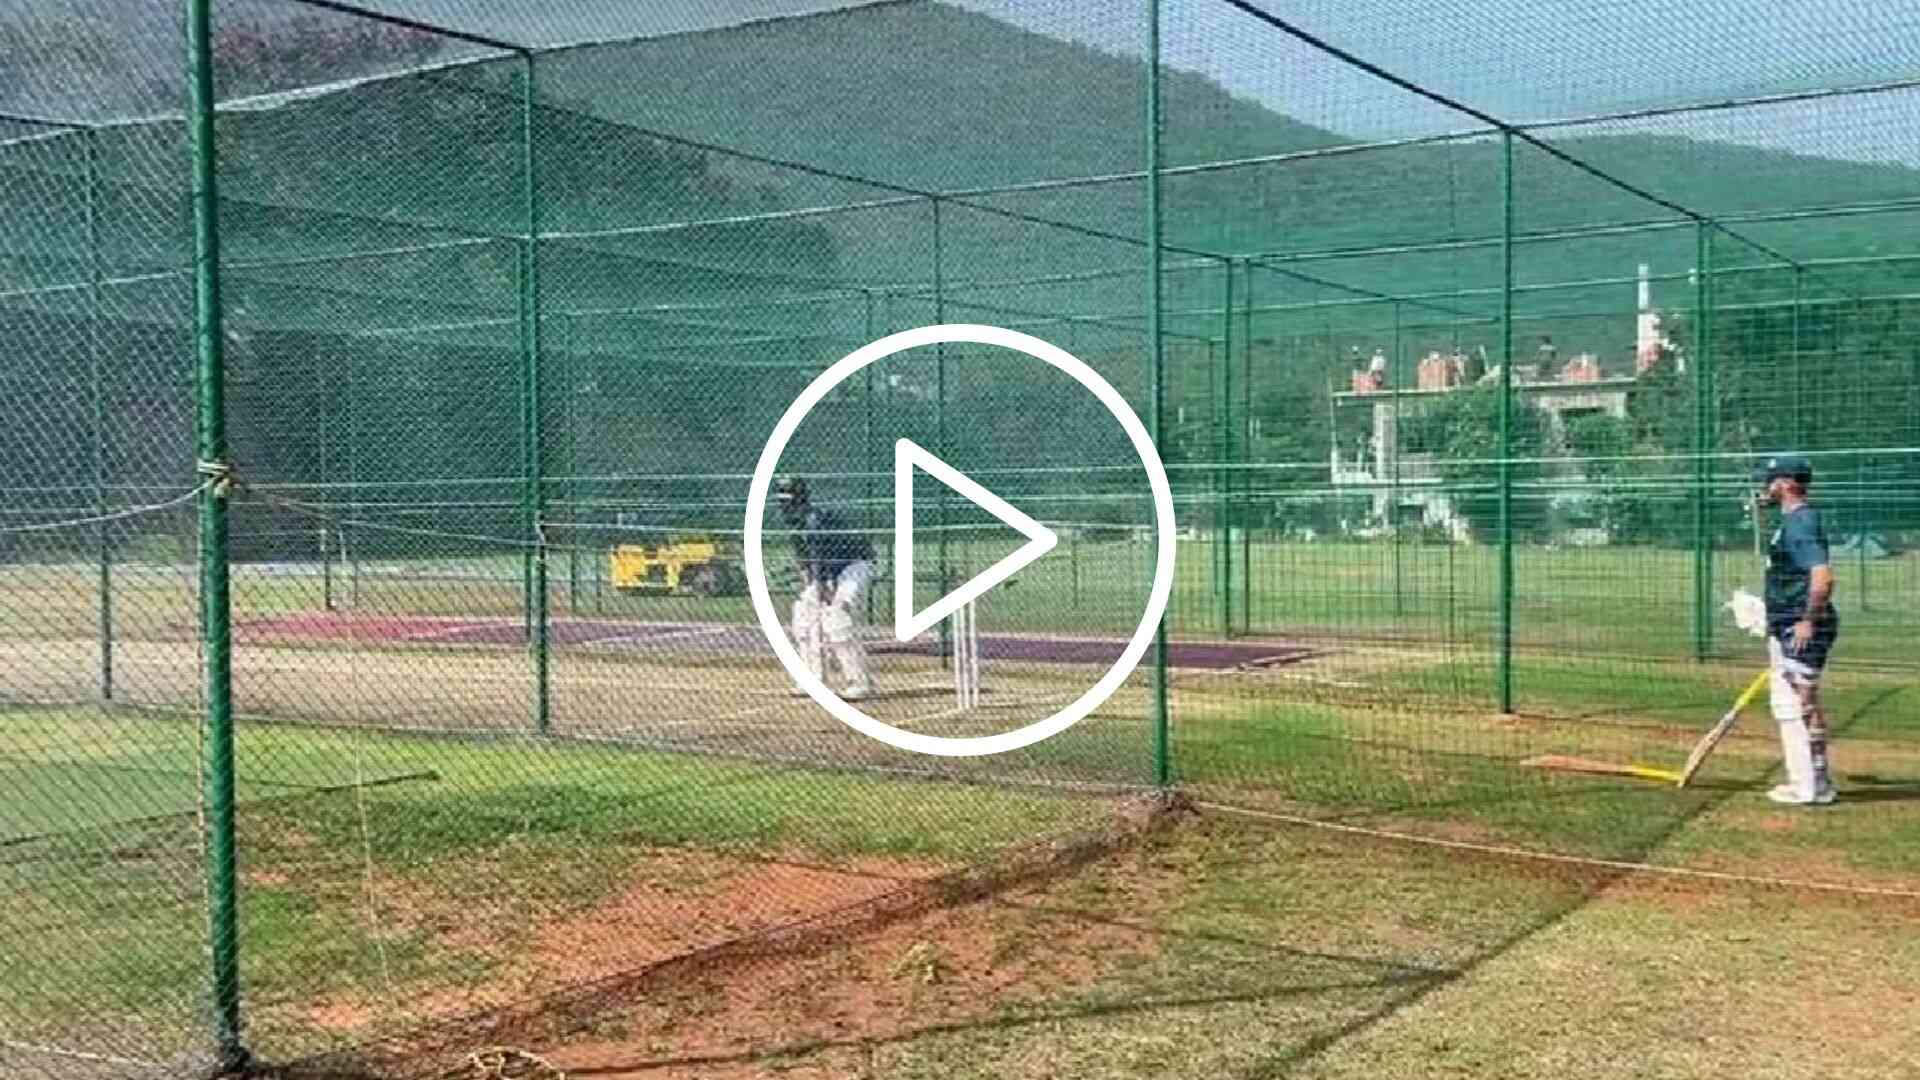 [Watch] Joe Root Bats Left-Handed Ahead Of 2nd Test Against India At Vizag